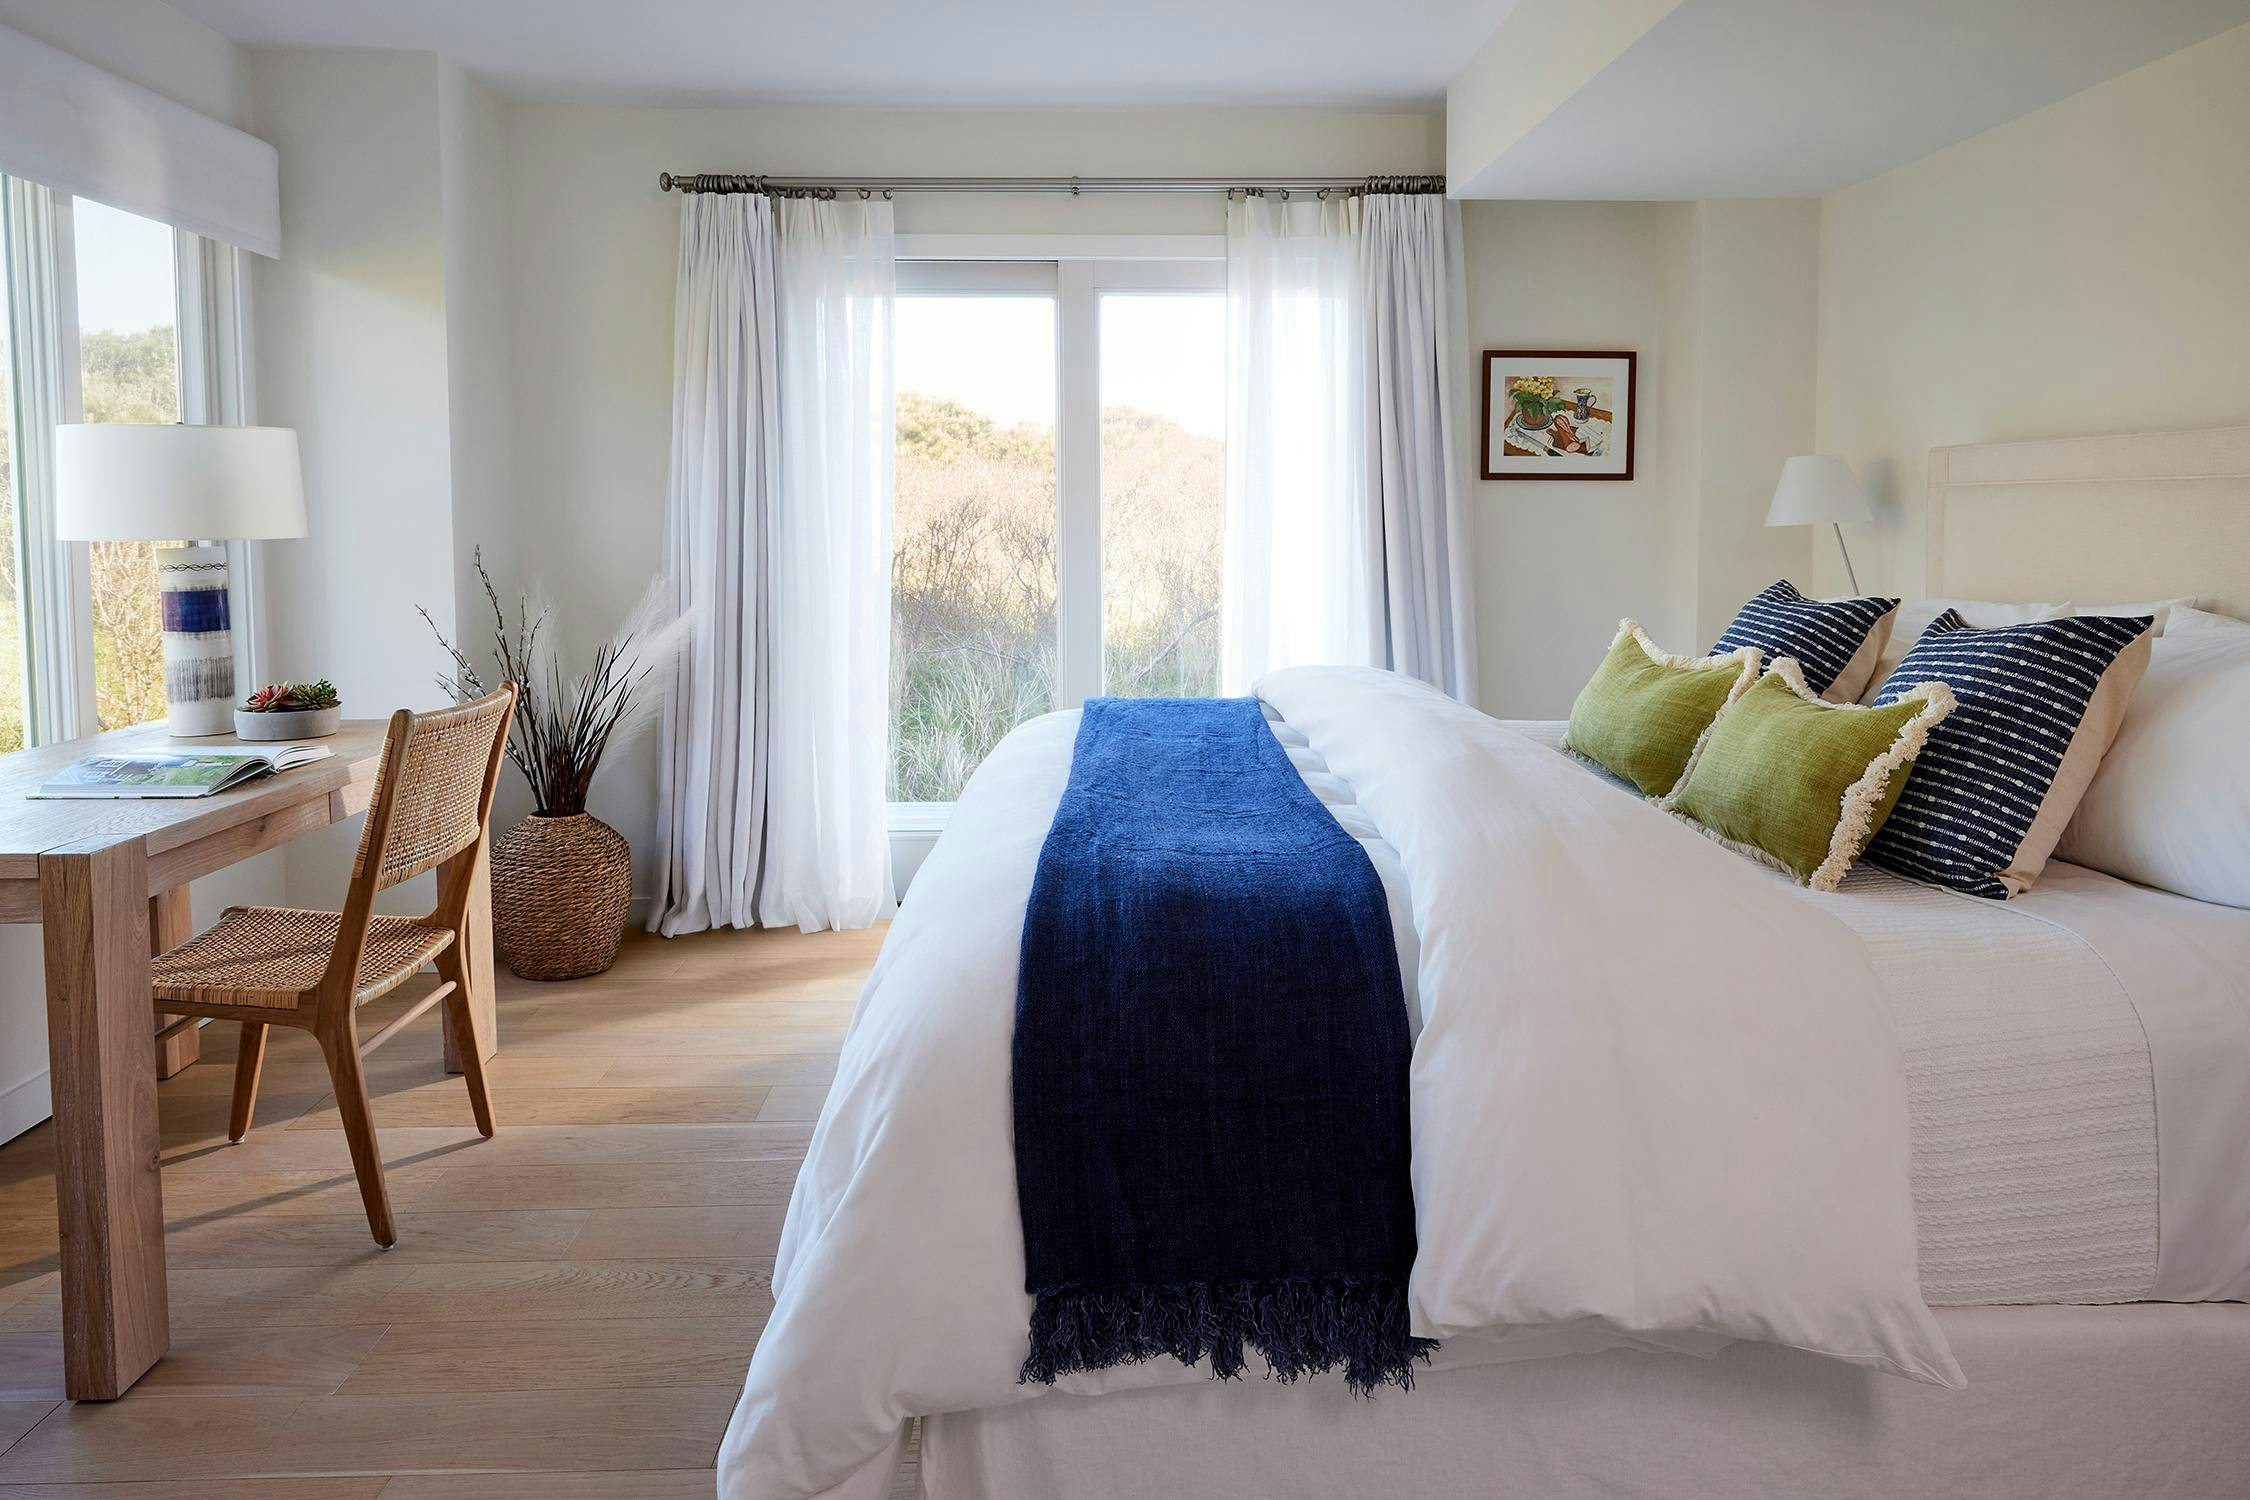 A coastal style bedroom in the Hamptons designed by Natura Interiors